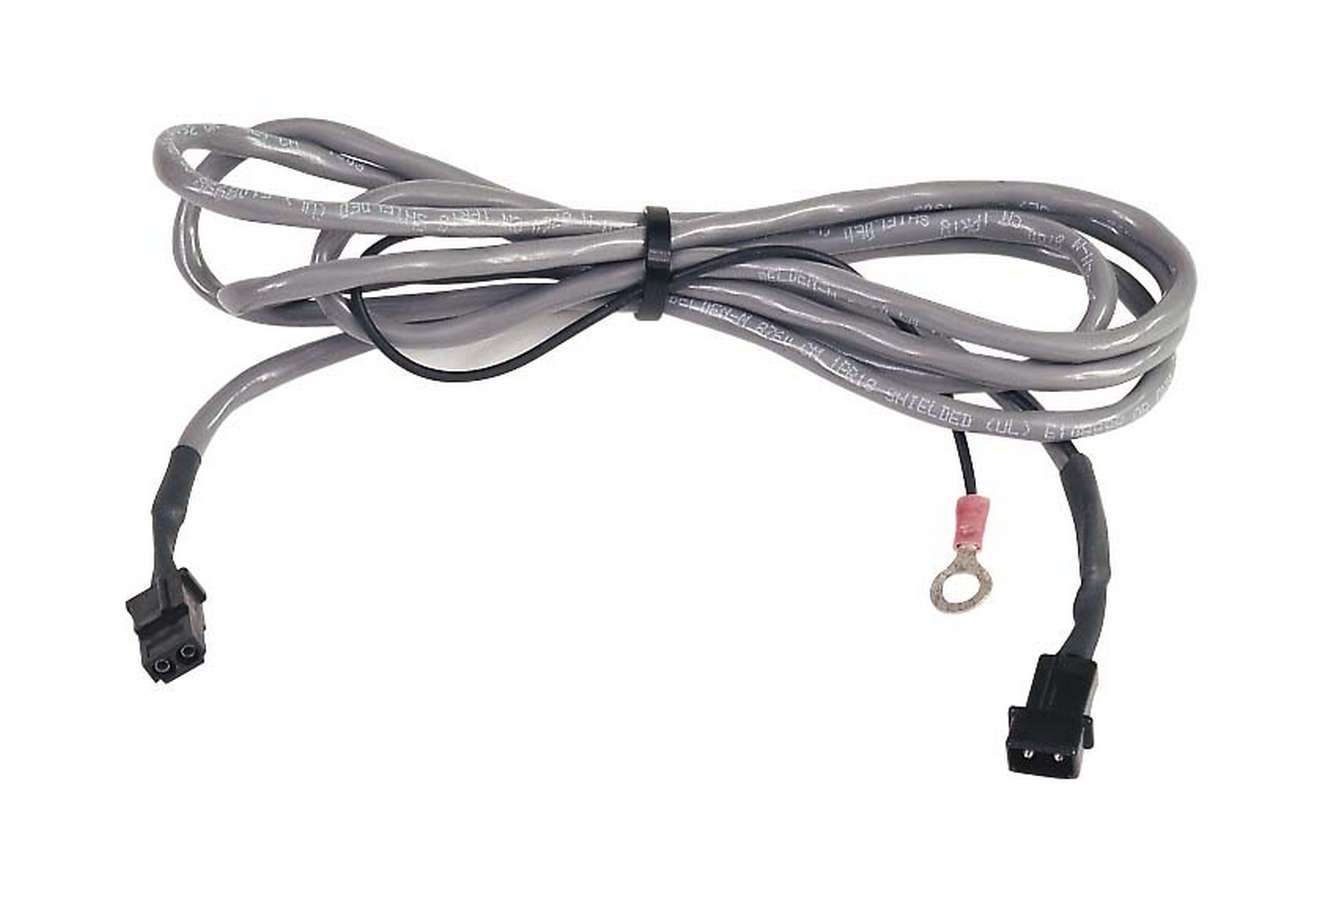 MSD Ignition 8862 Ignition Wiring Harness, 2 Pin Shielded Cable, 6 ft, MSD 6 / 7 / 8 Ignition to Crank Trigger Magnetic Pickup, Each